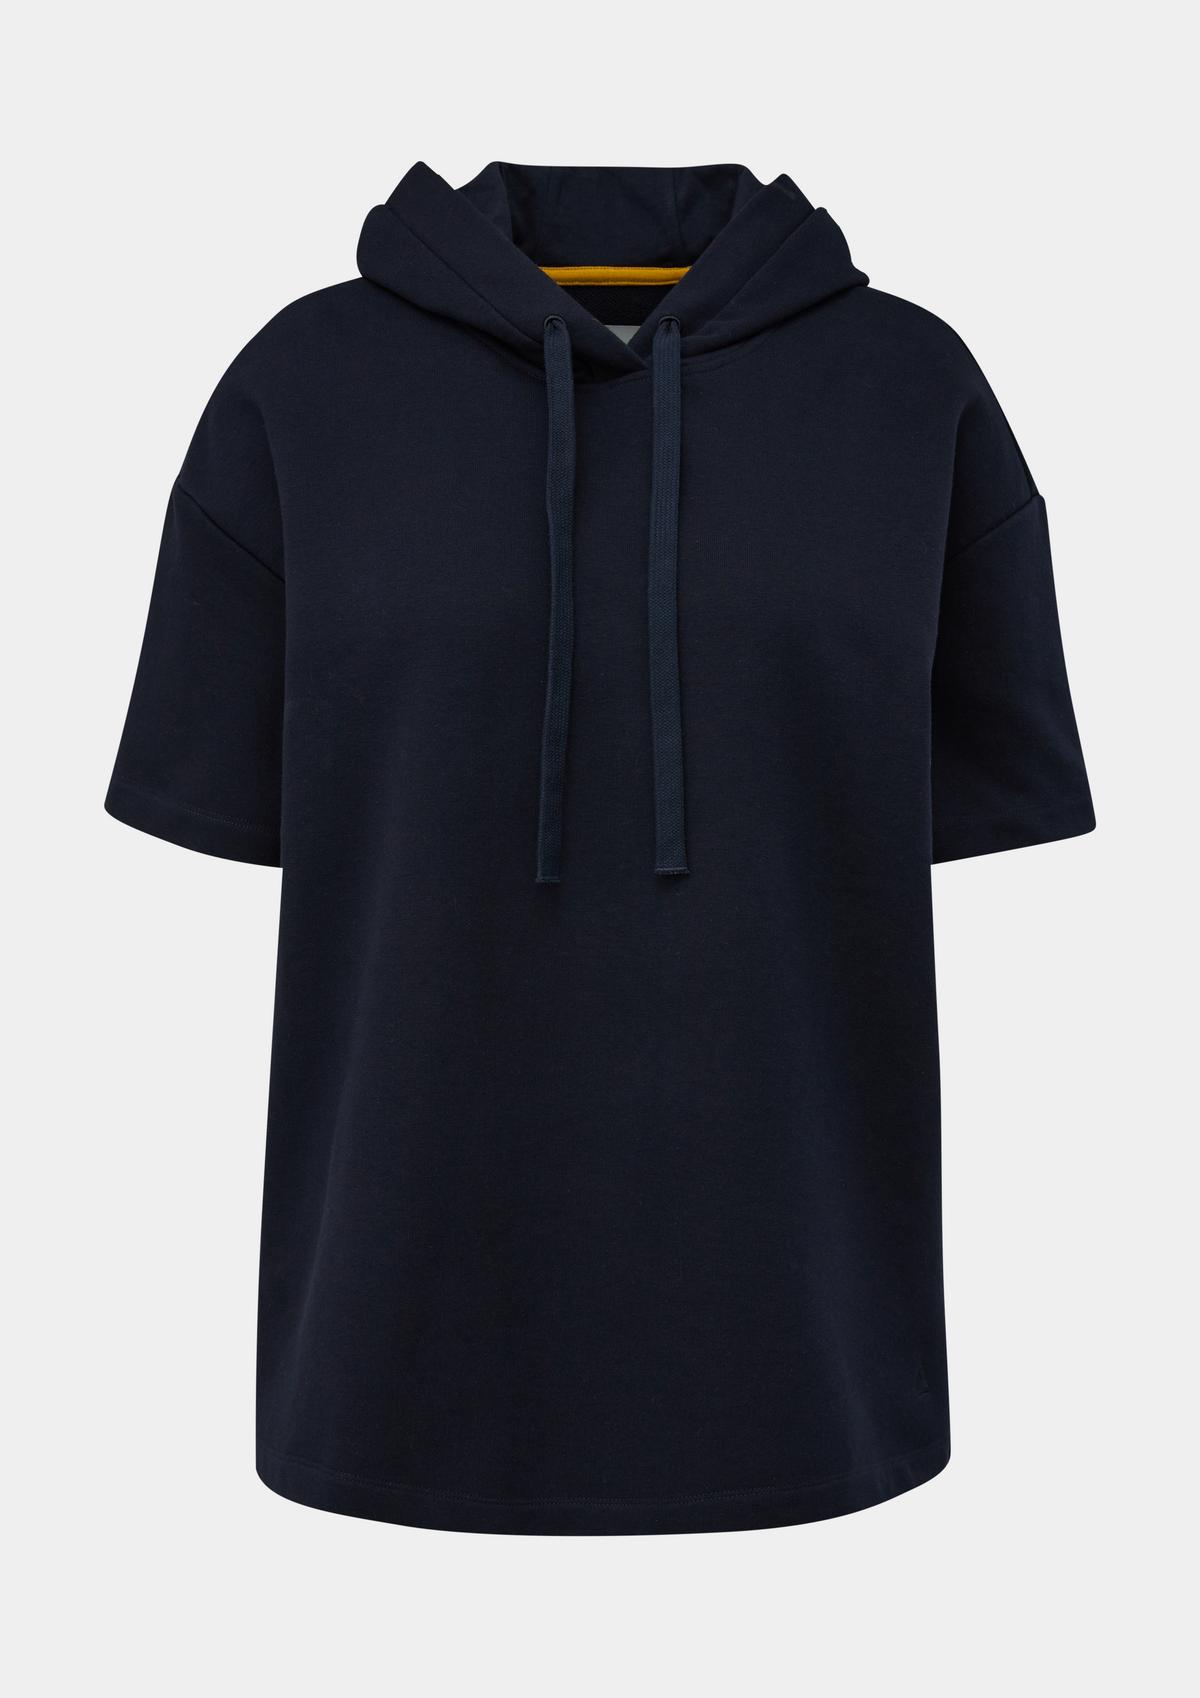 s.Oliver Hooded sweatshirt with short sleeves